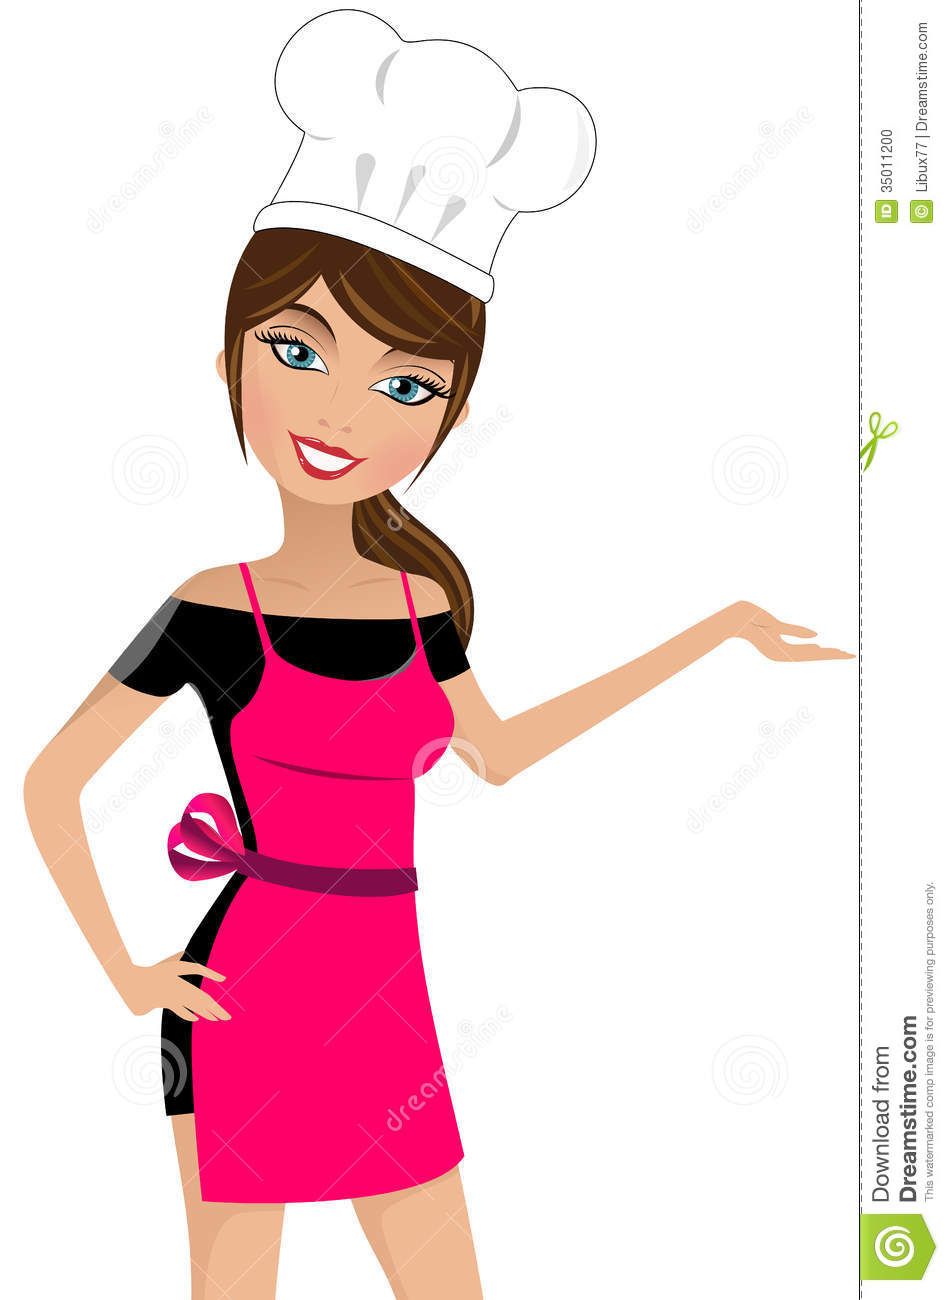 chef clipart lady chef